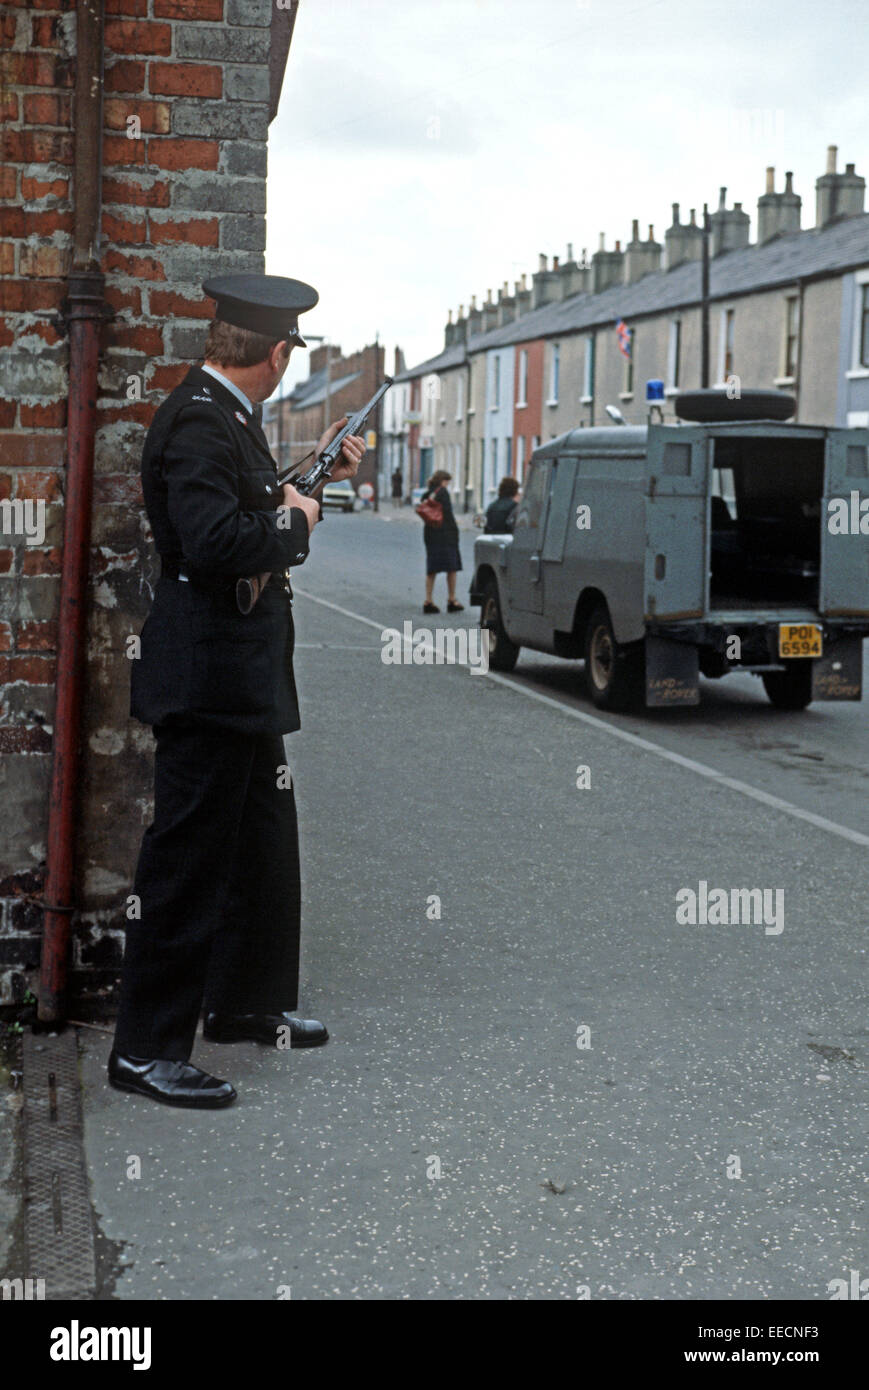 BELFAST, UNITED KINGDOM - SEPTEMBER 1978. RUC, Royal Ulster Constabulary, policeman on Patrol of East Belfast Streets during The Troubles, Northern Ireland. Stock Photo